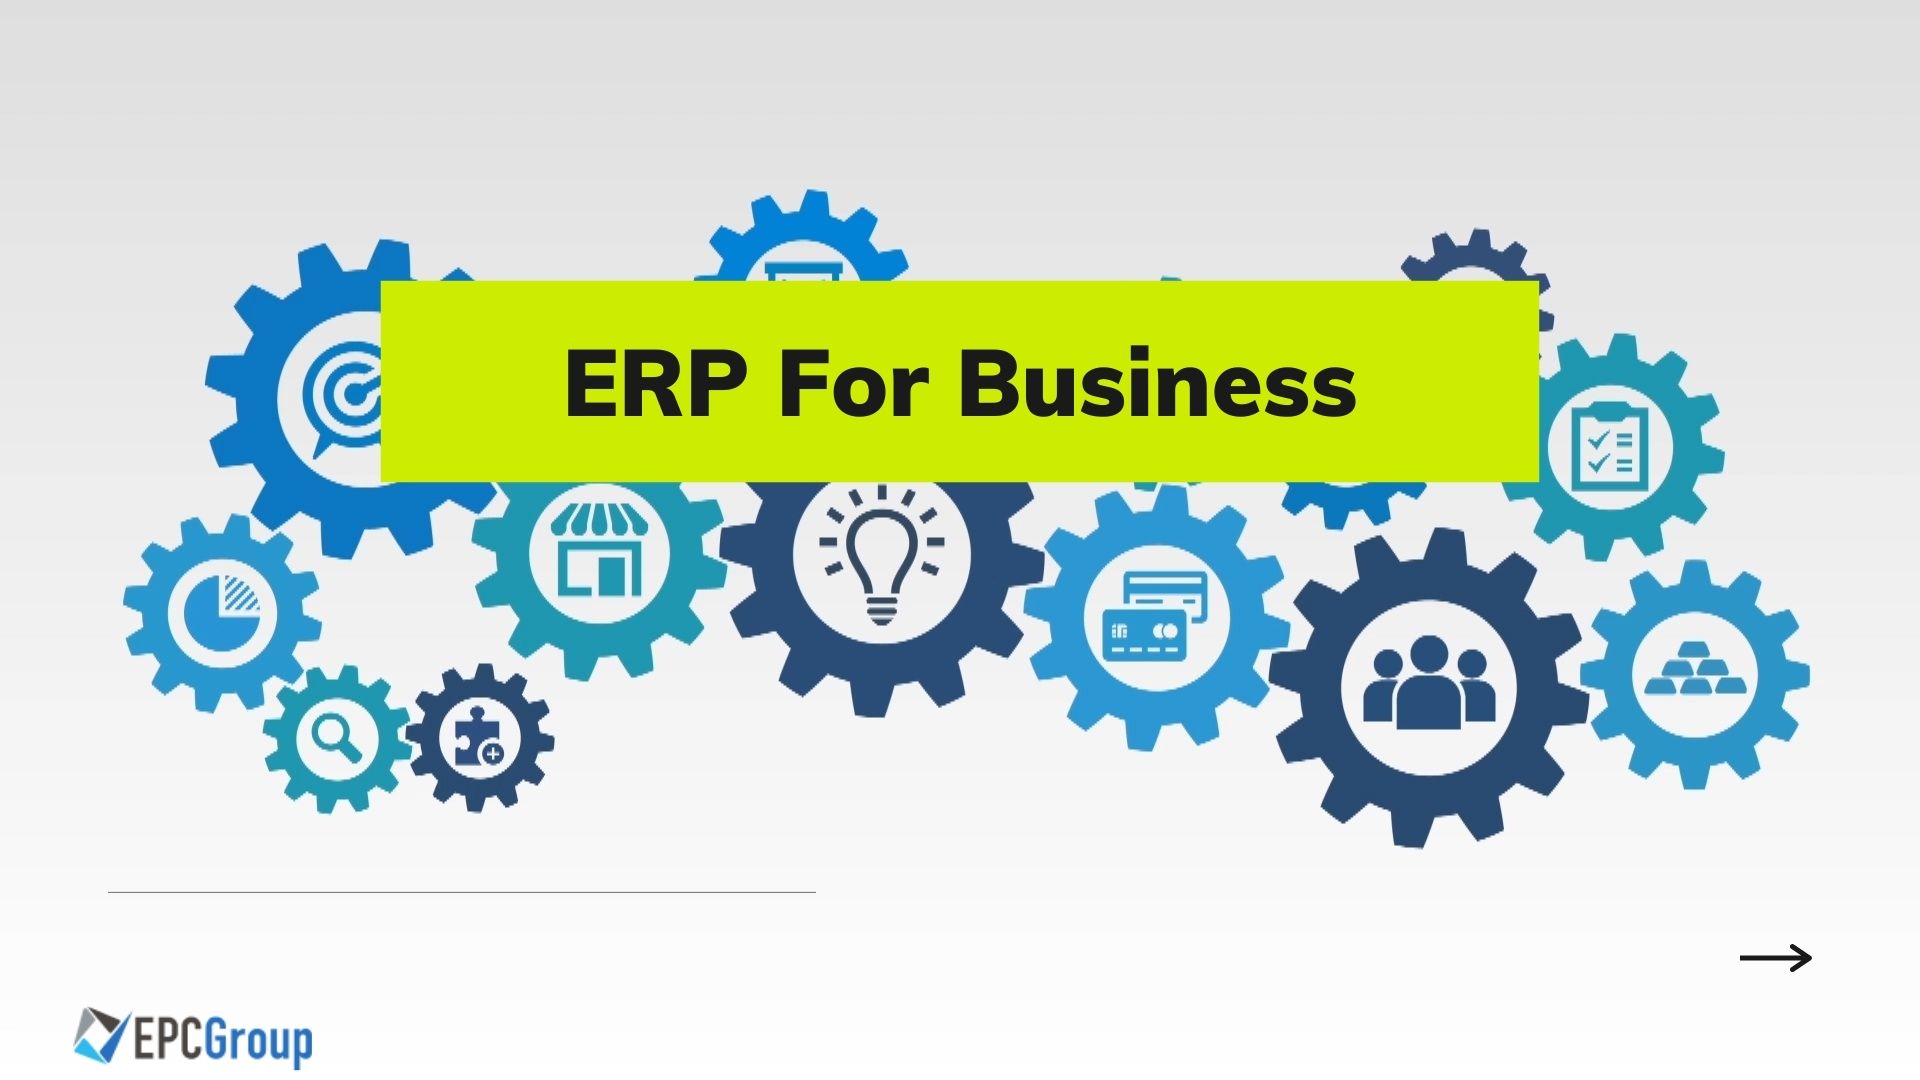 What Types of Companies Need ERP?